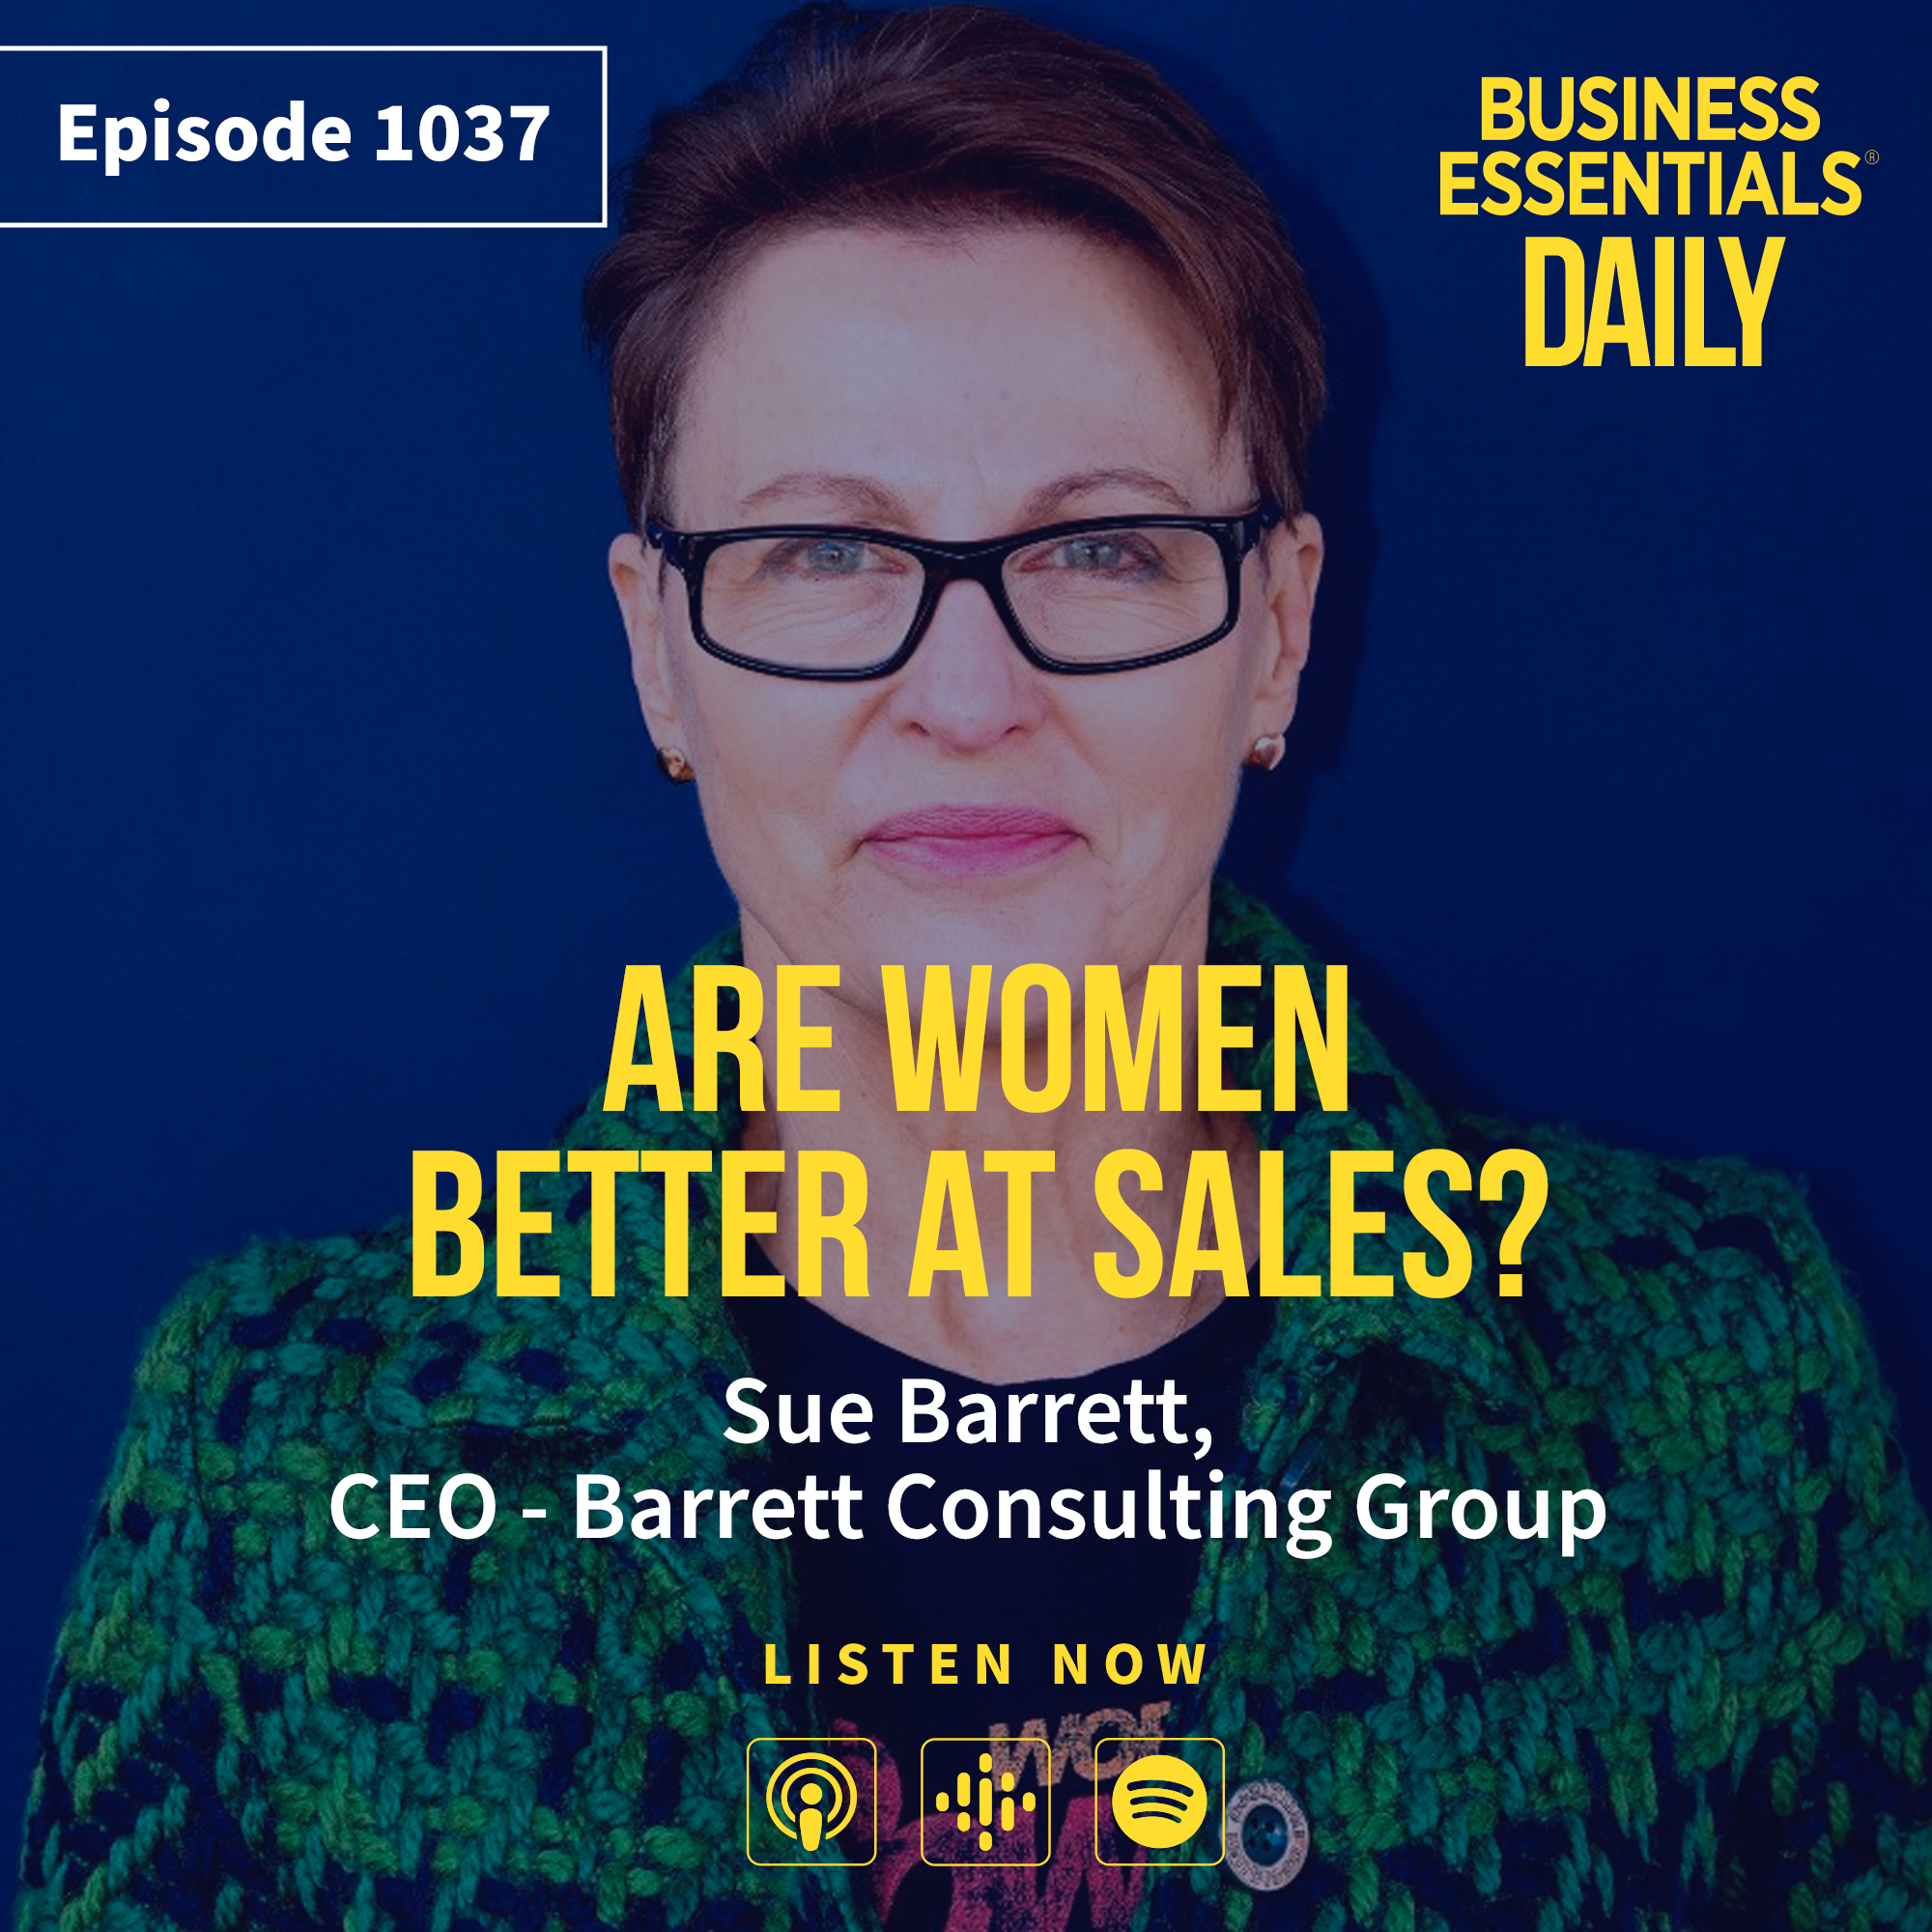 Are women better at sales?